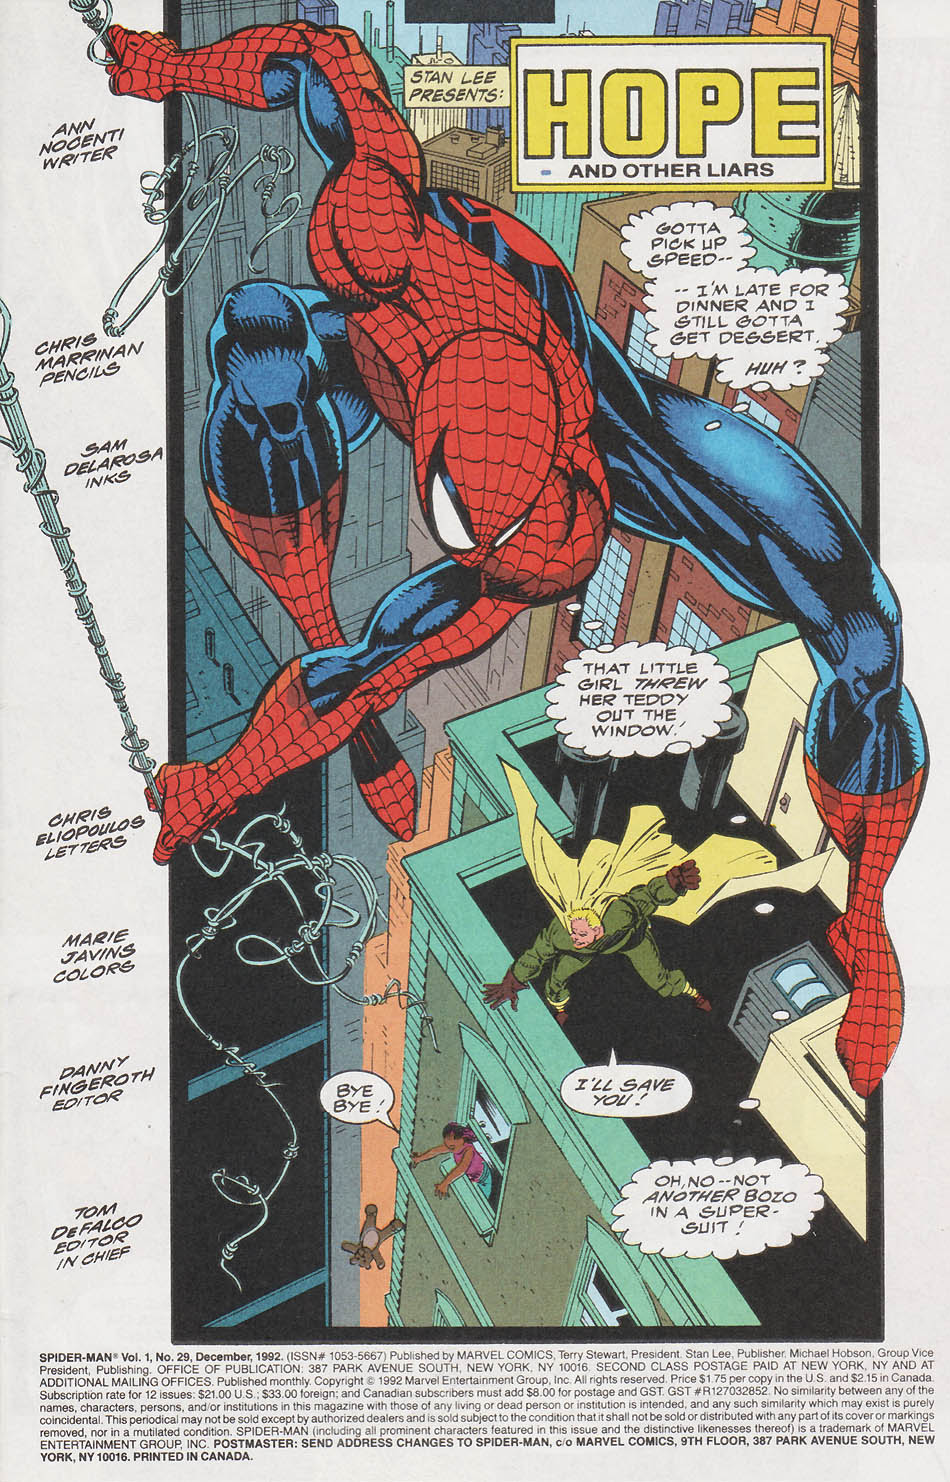 Spider-Man (1990) 29_-_Hope_And_Other_Liars Page 1